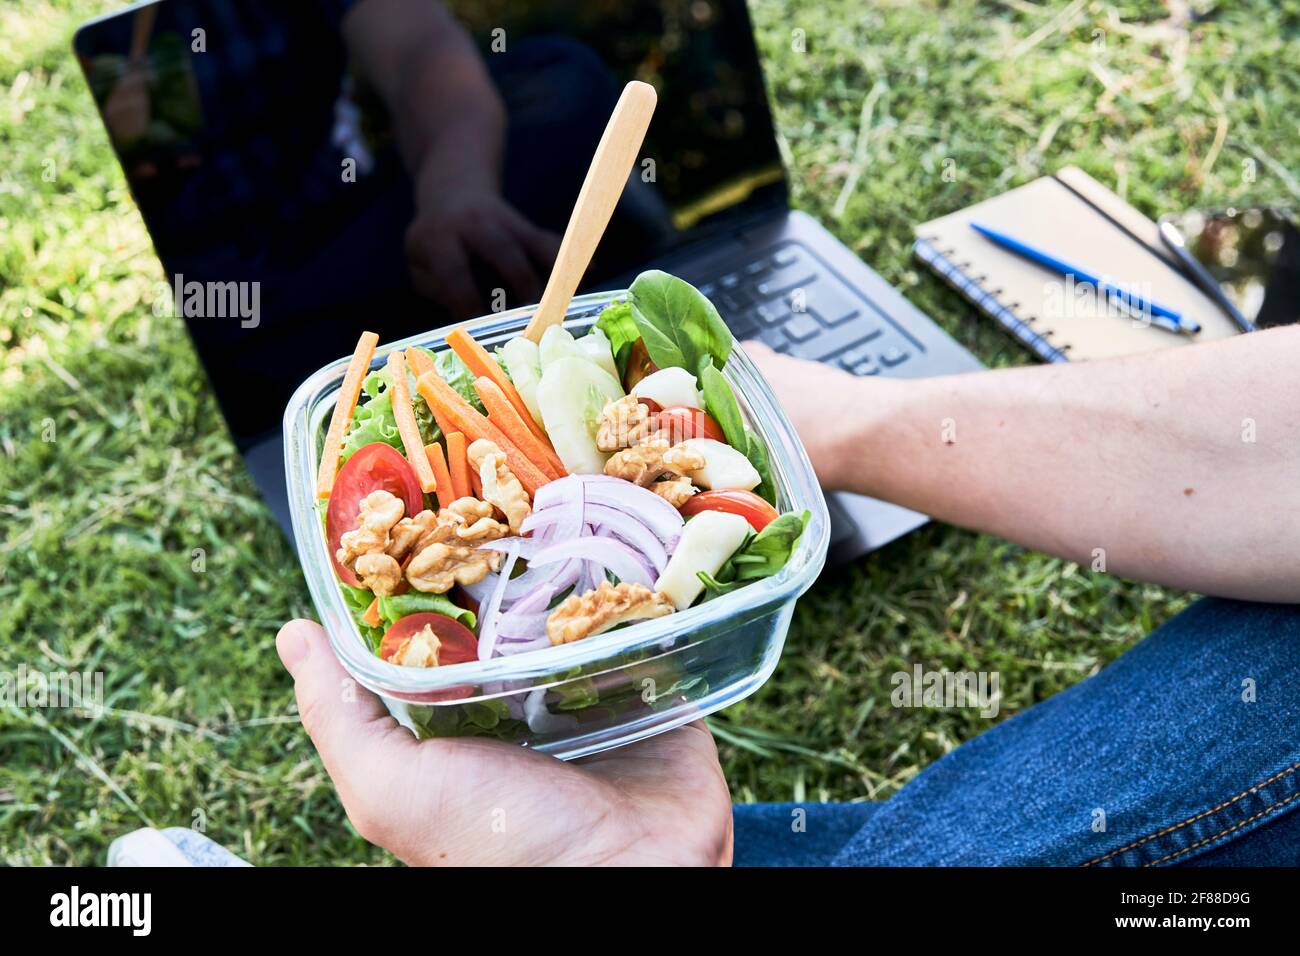 Close up, unrecognizable young man sitting in the grass eating a fresh salad while working or studying on his laptop. Concepts of working outdoors and Stock Photo